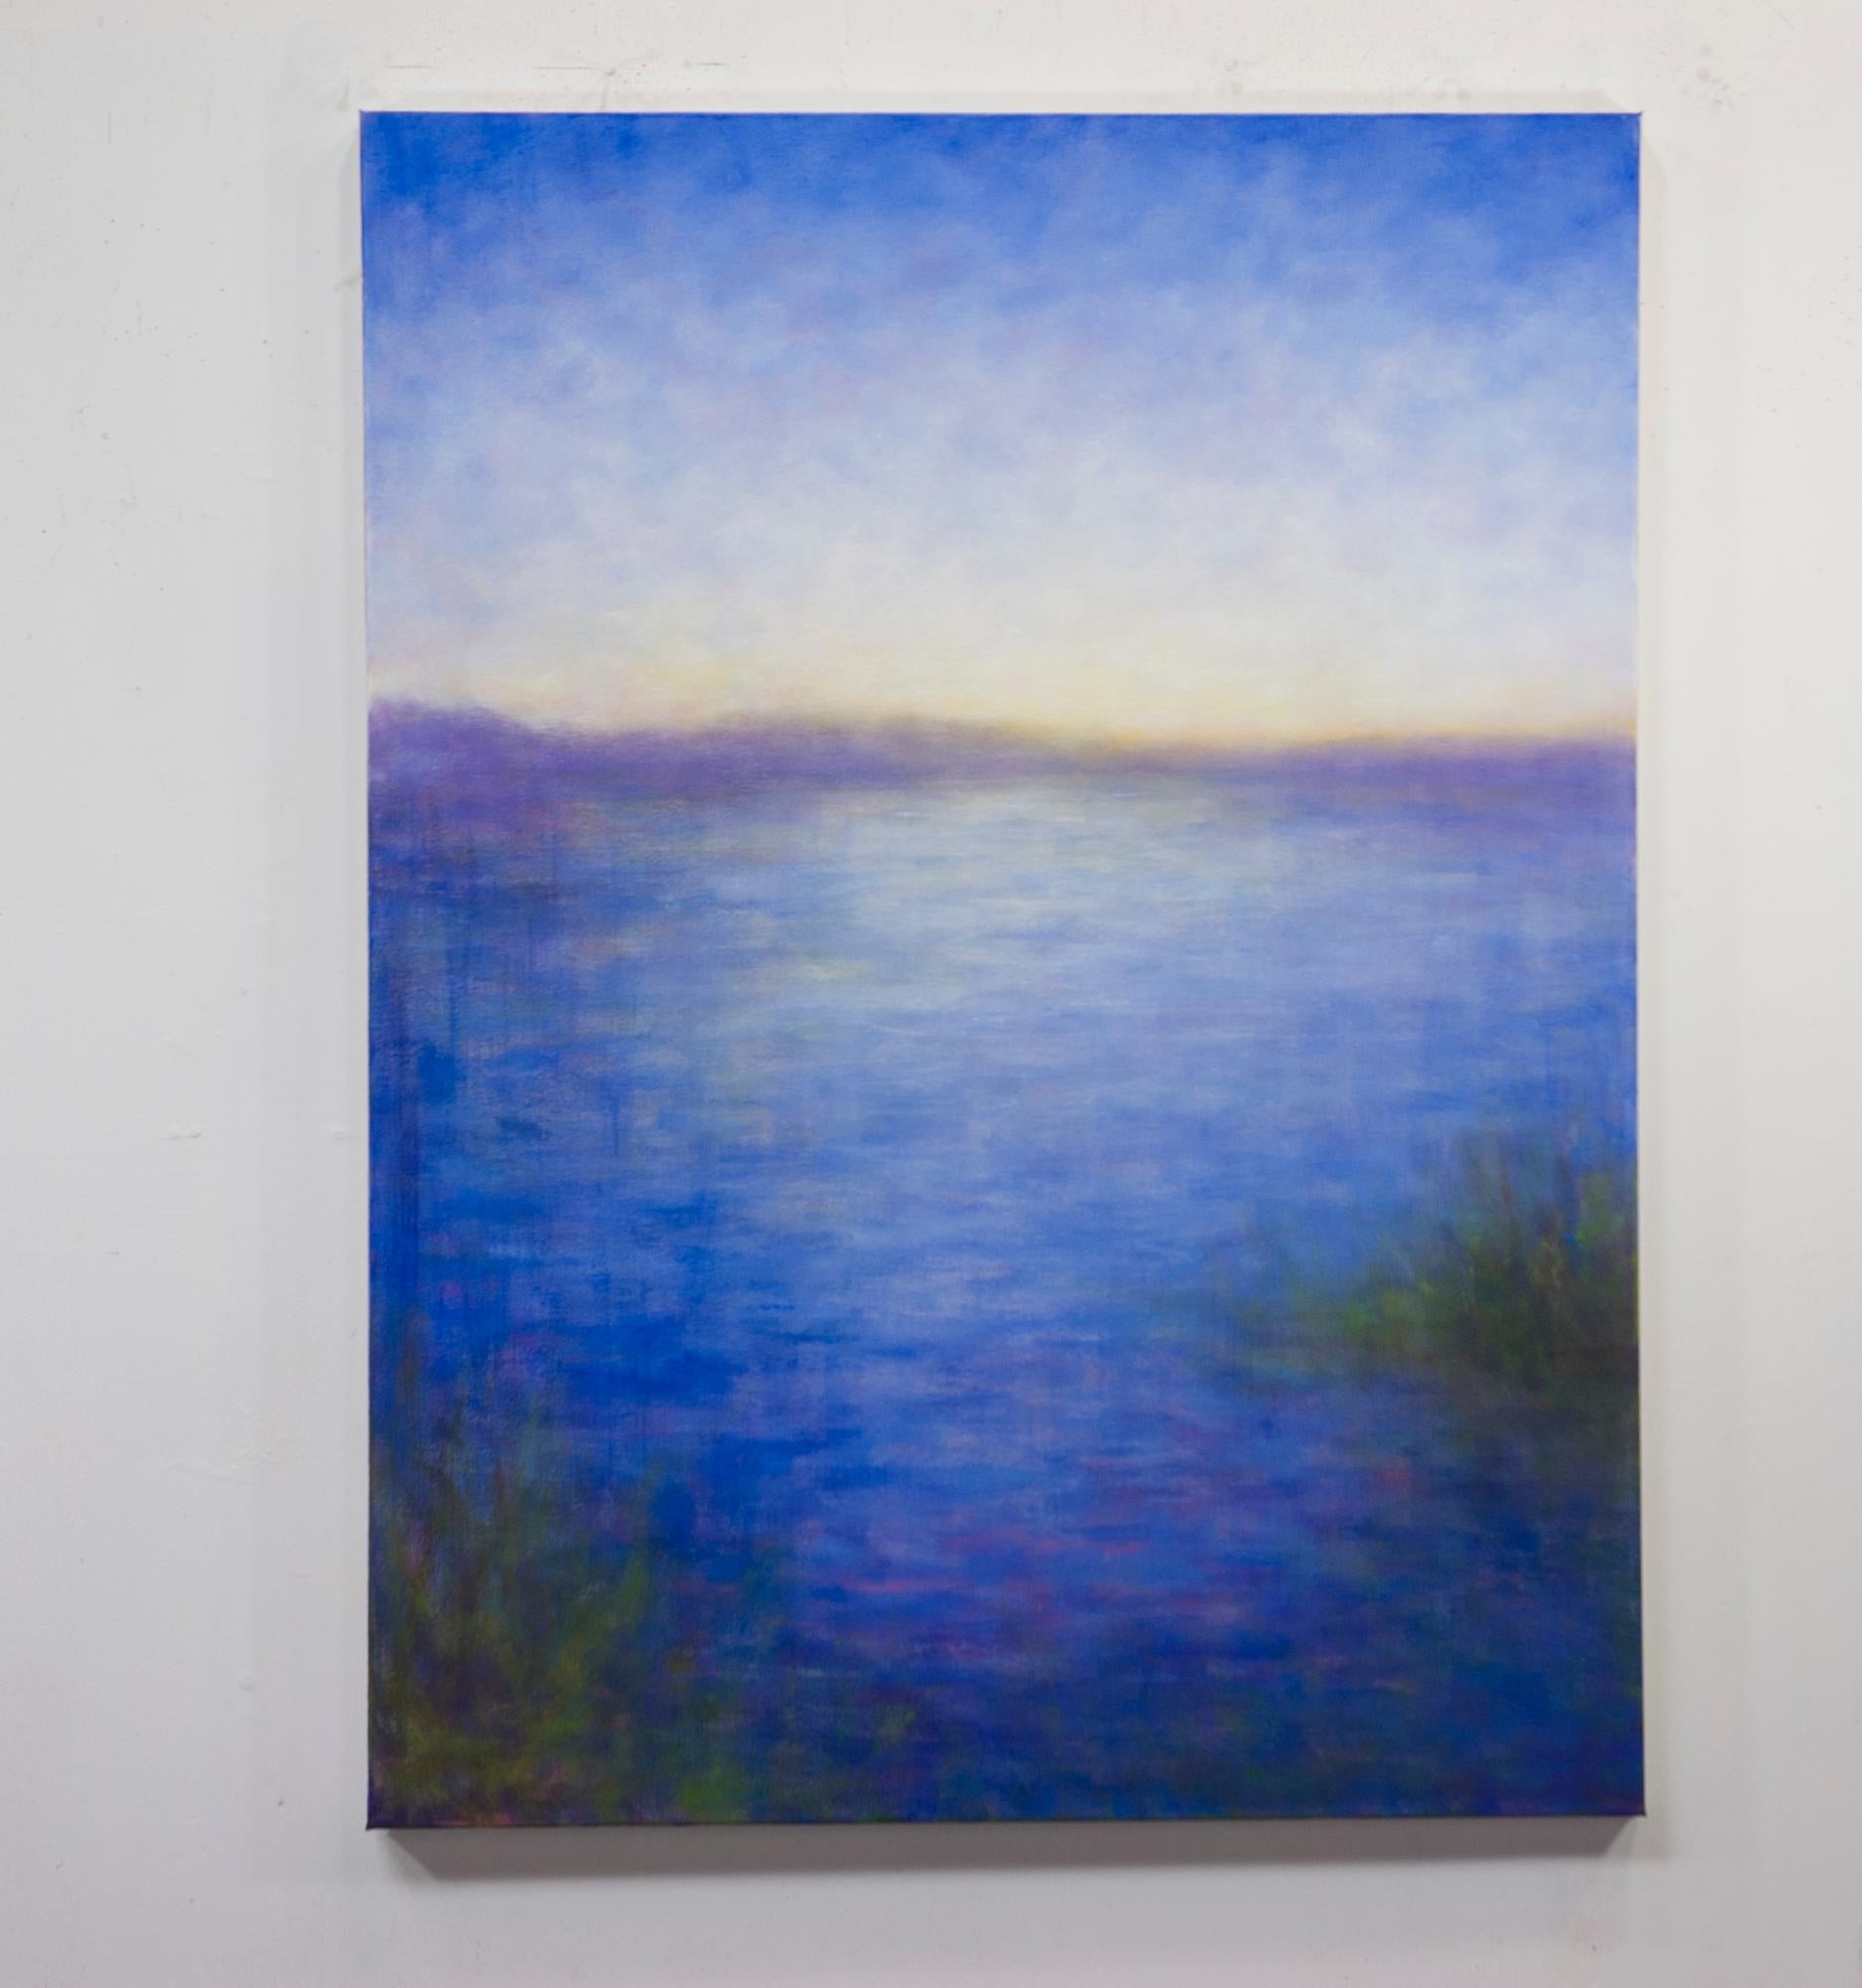 <p>Artist Comments<br>I imagine myself standing on the shore of the beach in Santa Barbara looking out towards the islands in the distance. The blue of the ocean and sky brings to mind feelings of calmness and serenity.</p><p>About the